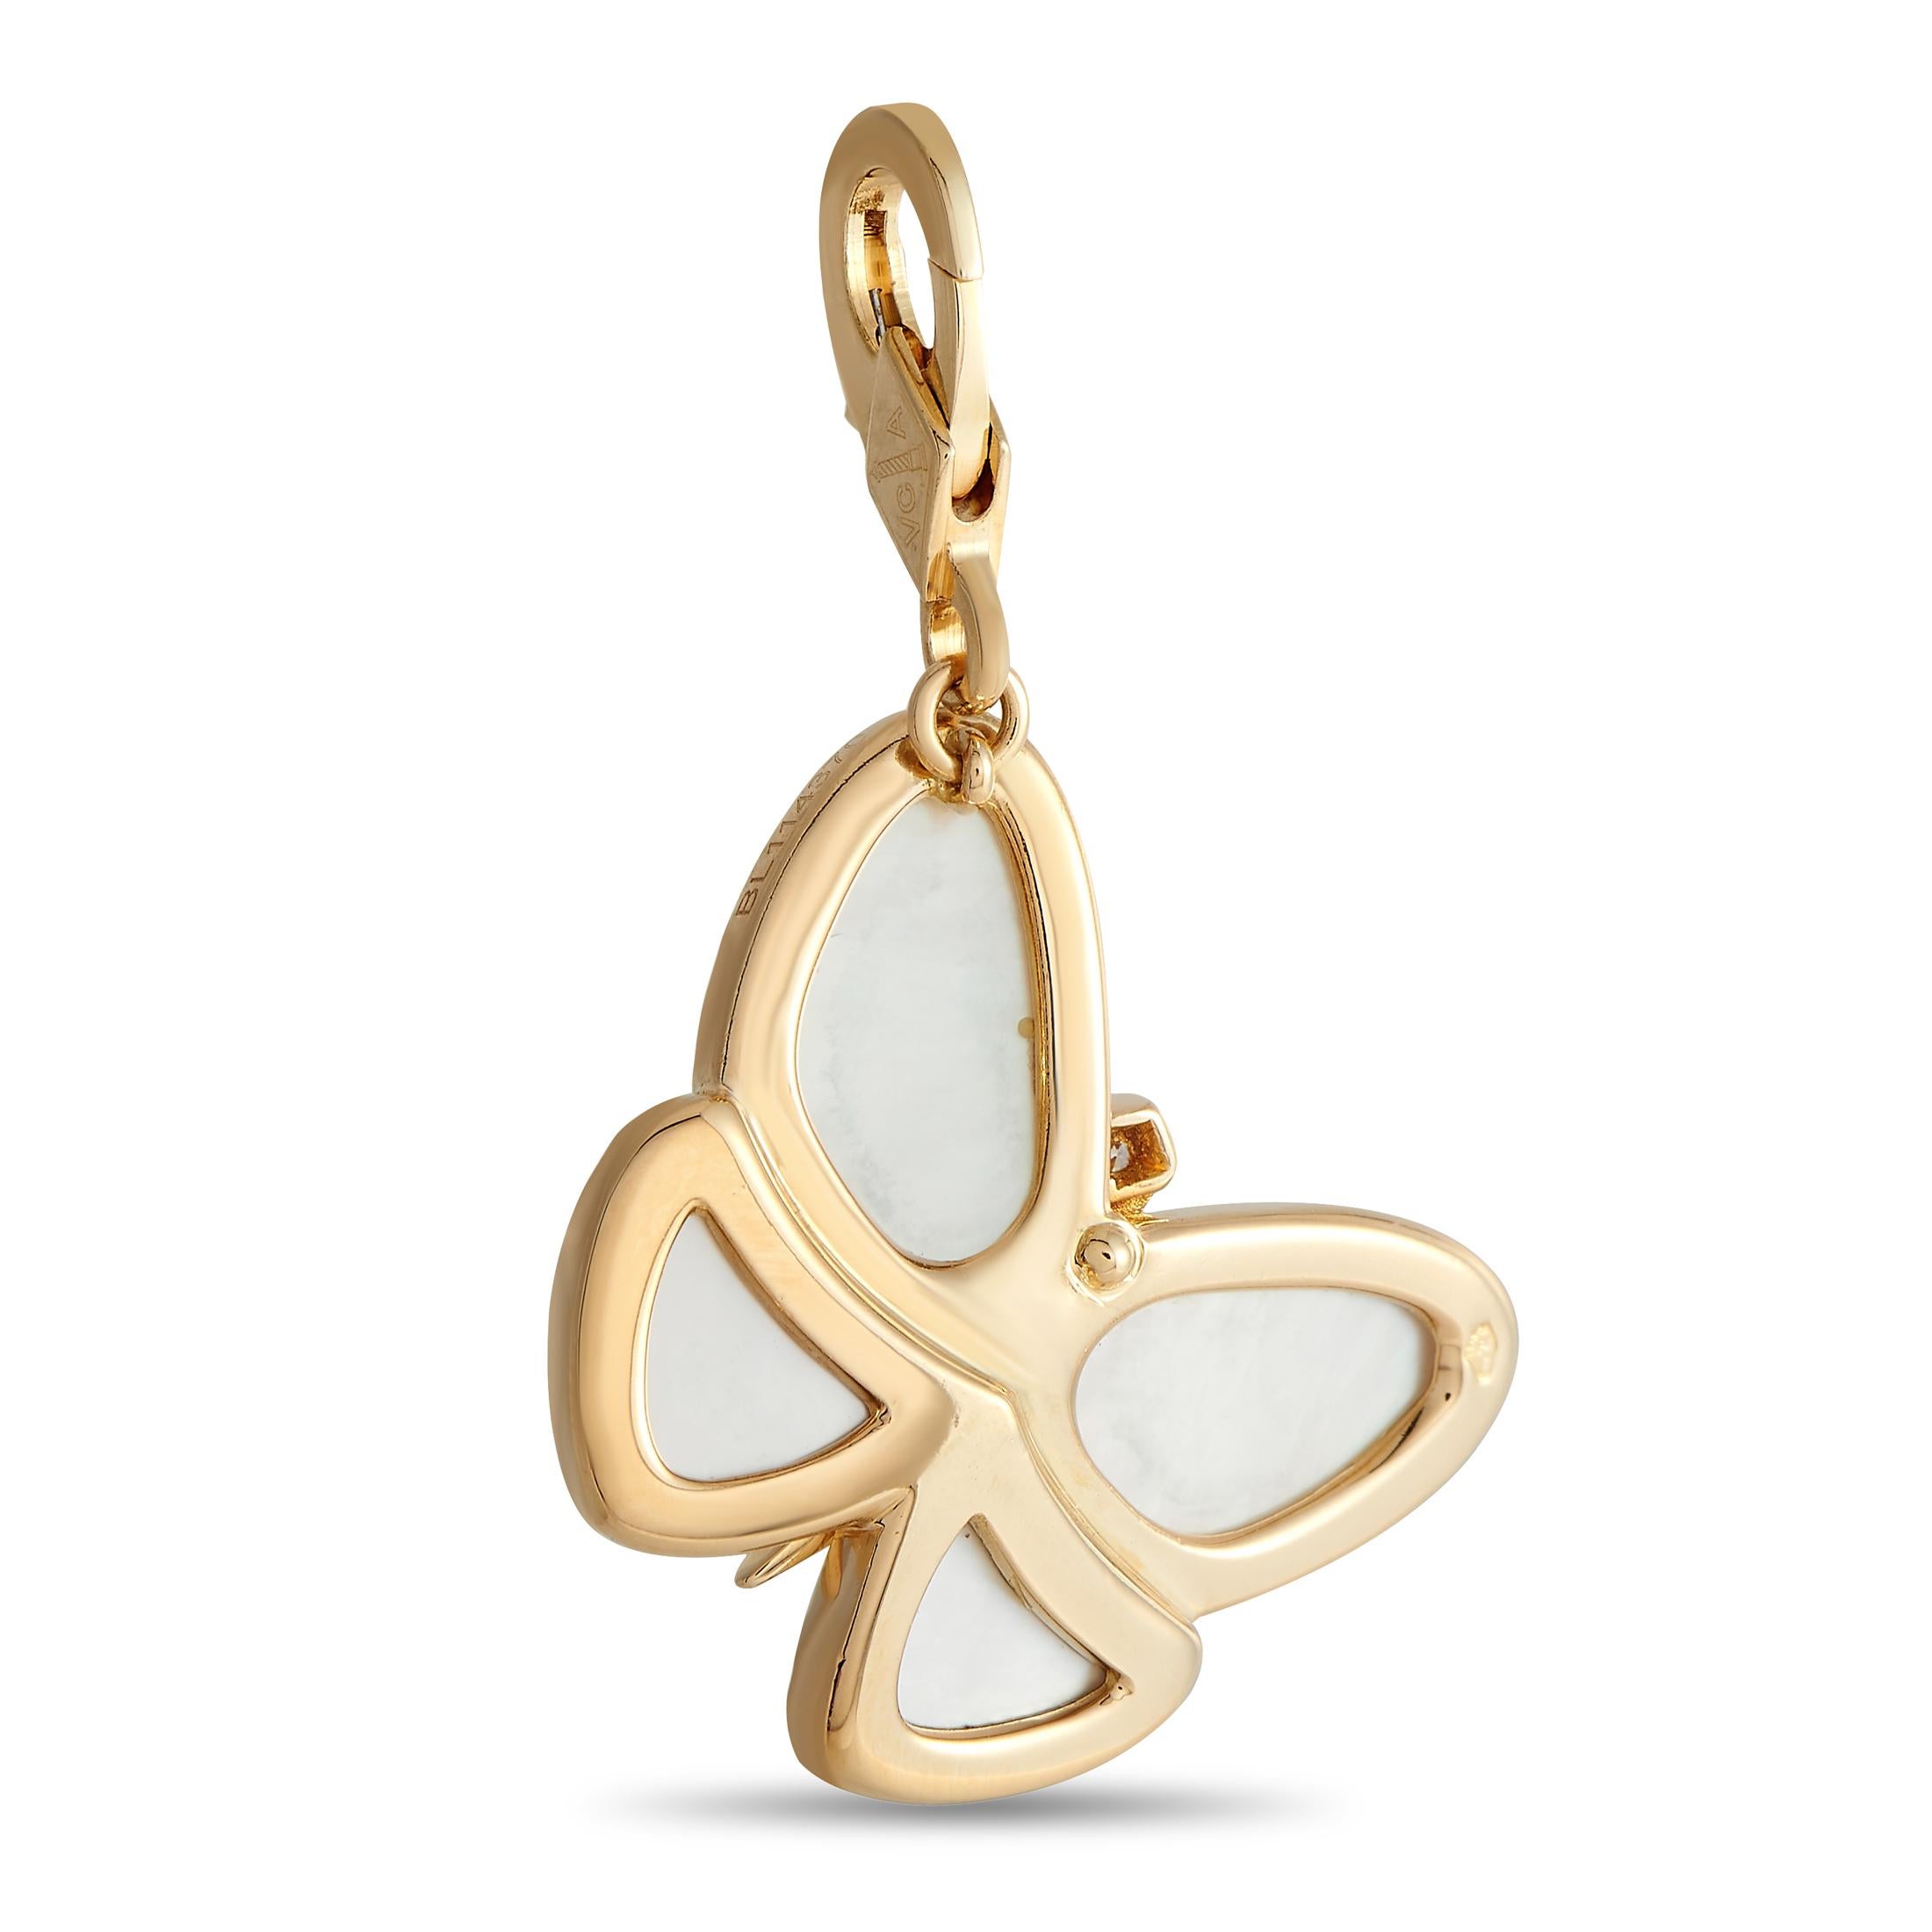 Exuding femininity and elegance, this Van Cleef & Arpels pendant charm will instantly take your style to new heights. It features a graceful butterfly silhouette in 18K yellow gold, with a body traced with diamonds and wings inlaid with